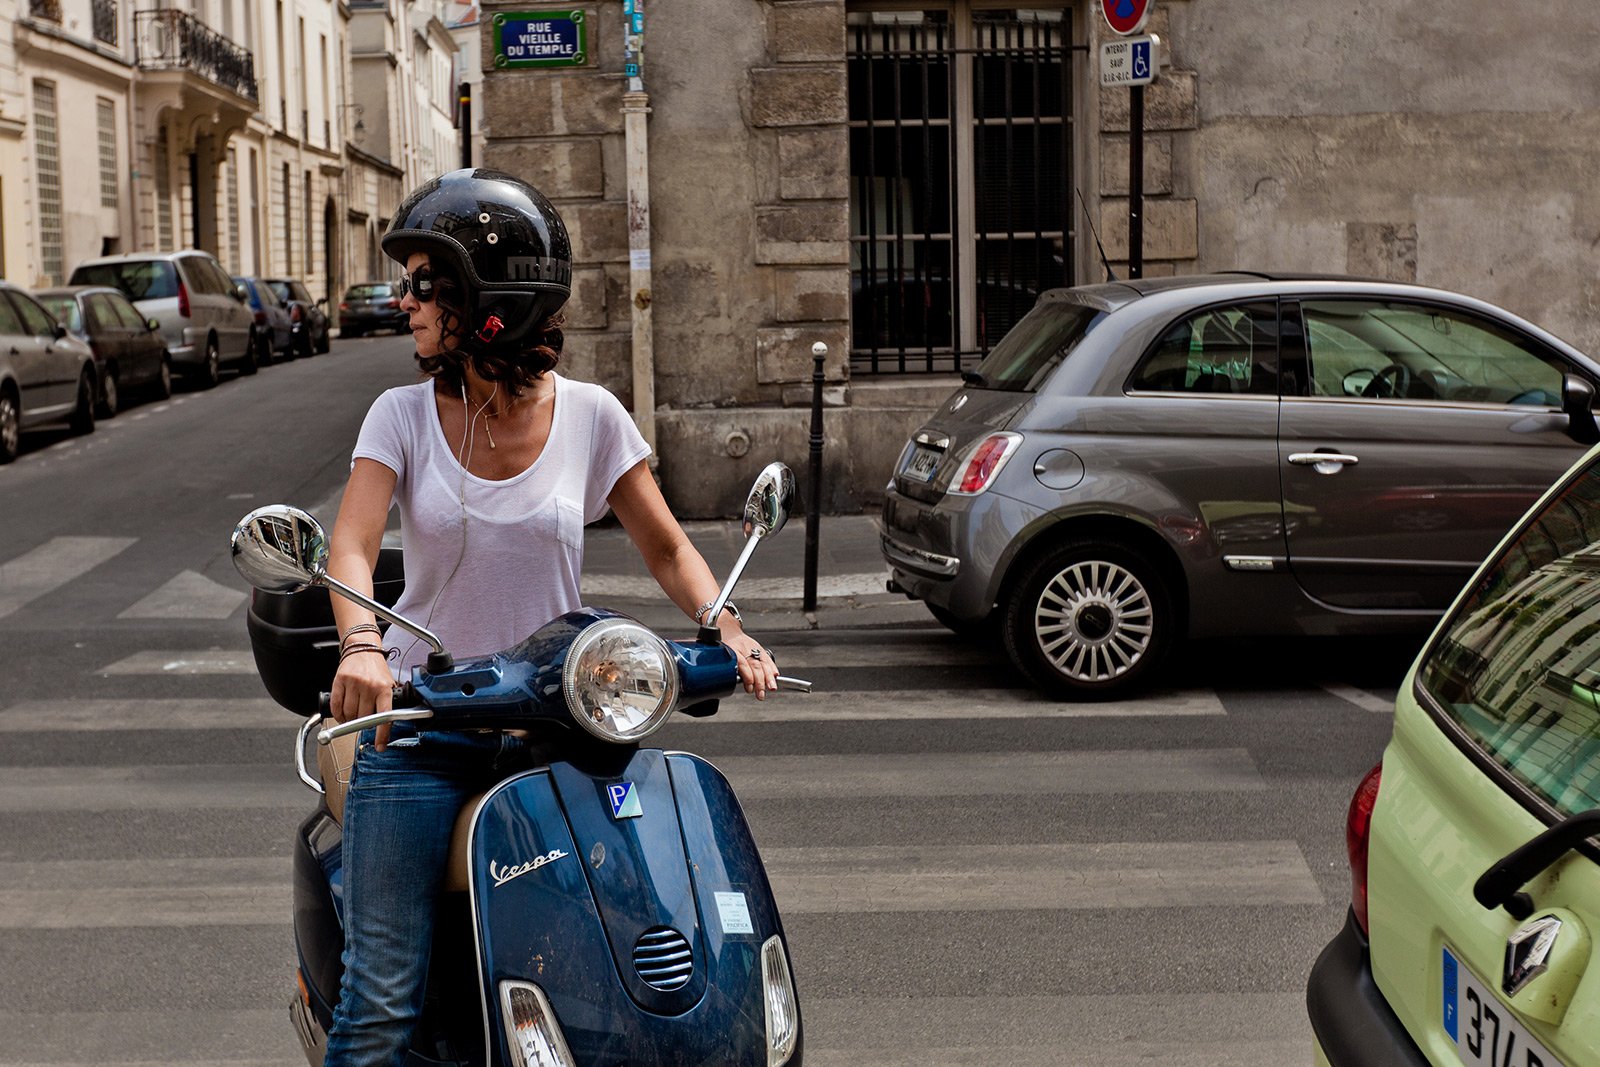 How to ride on retro scooter in Paris